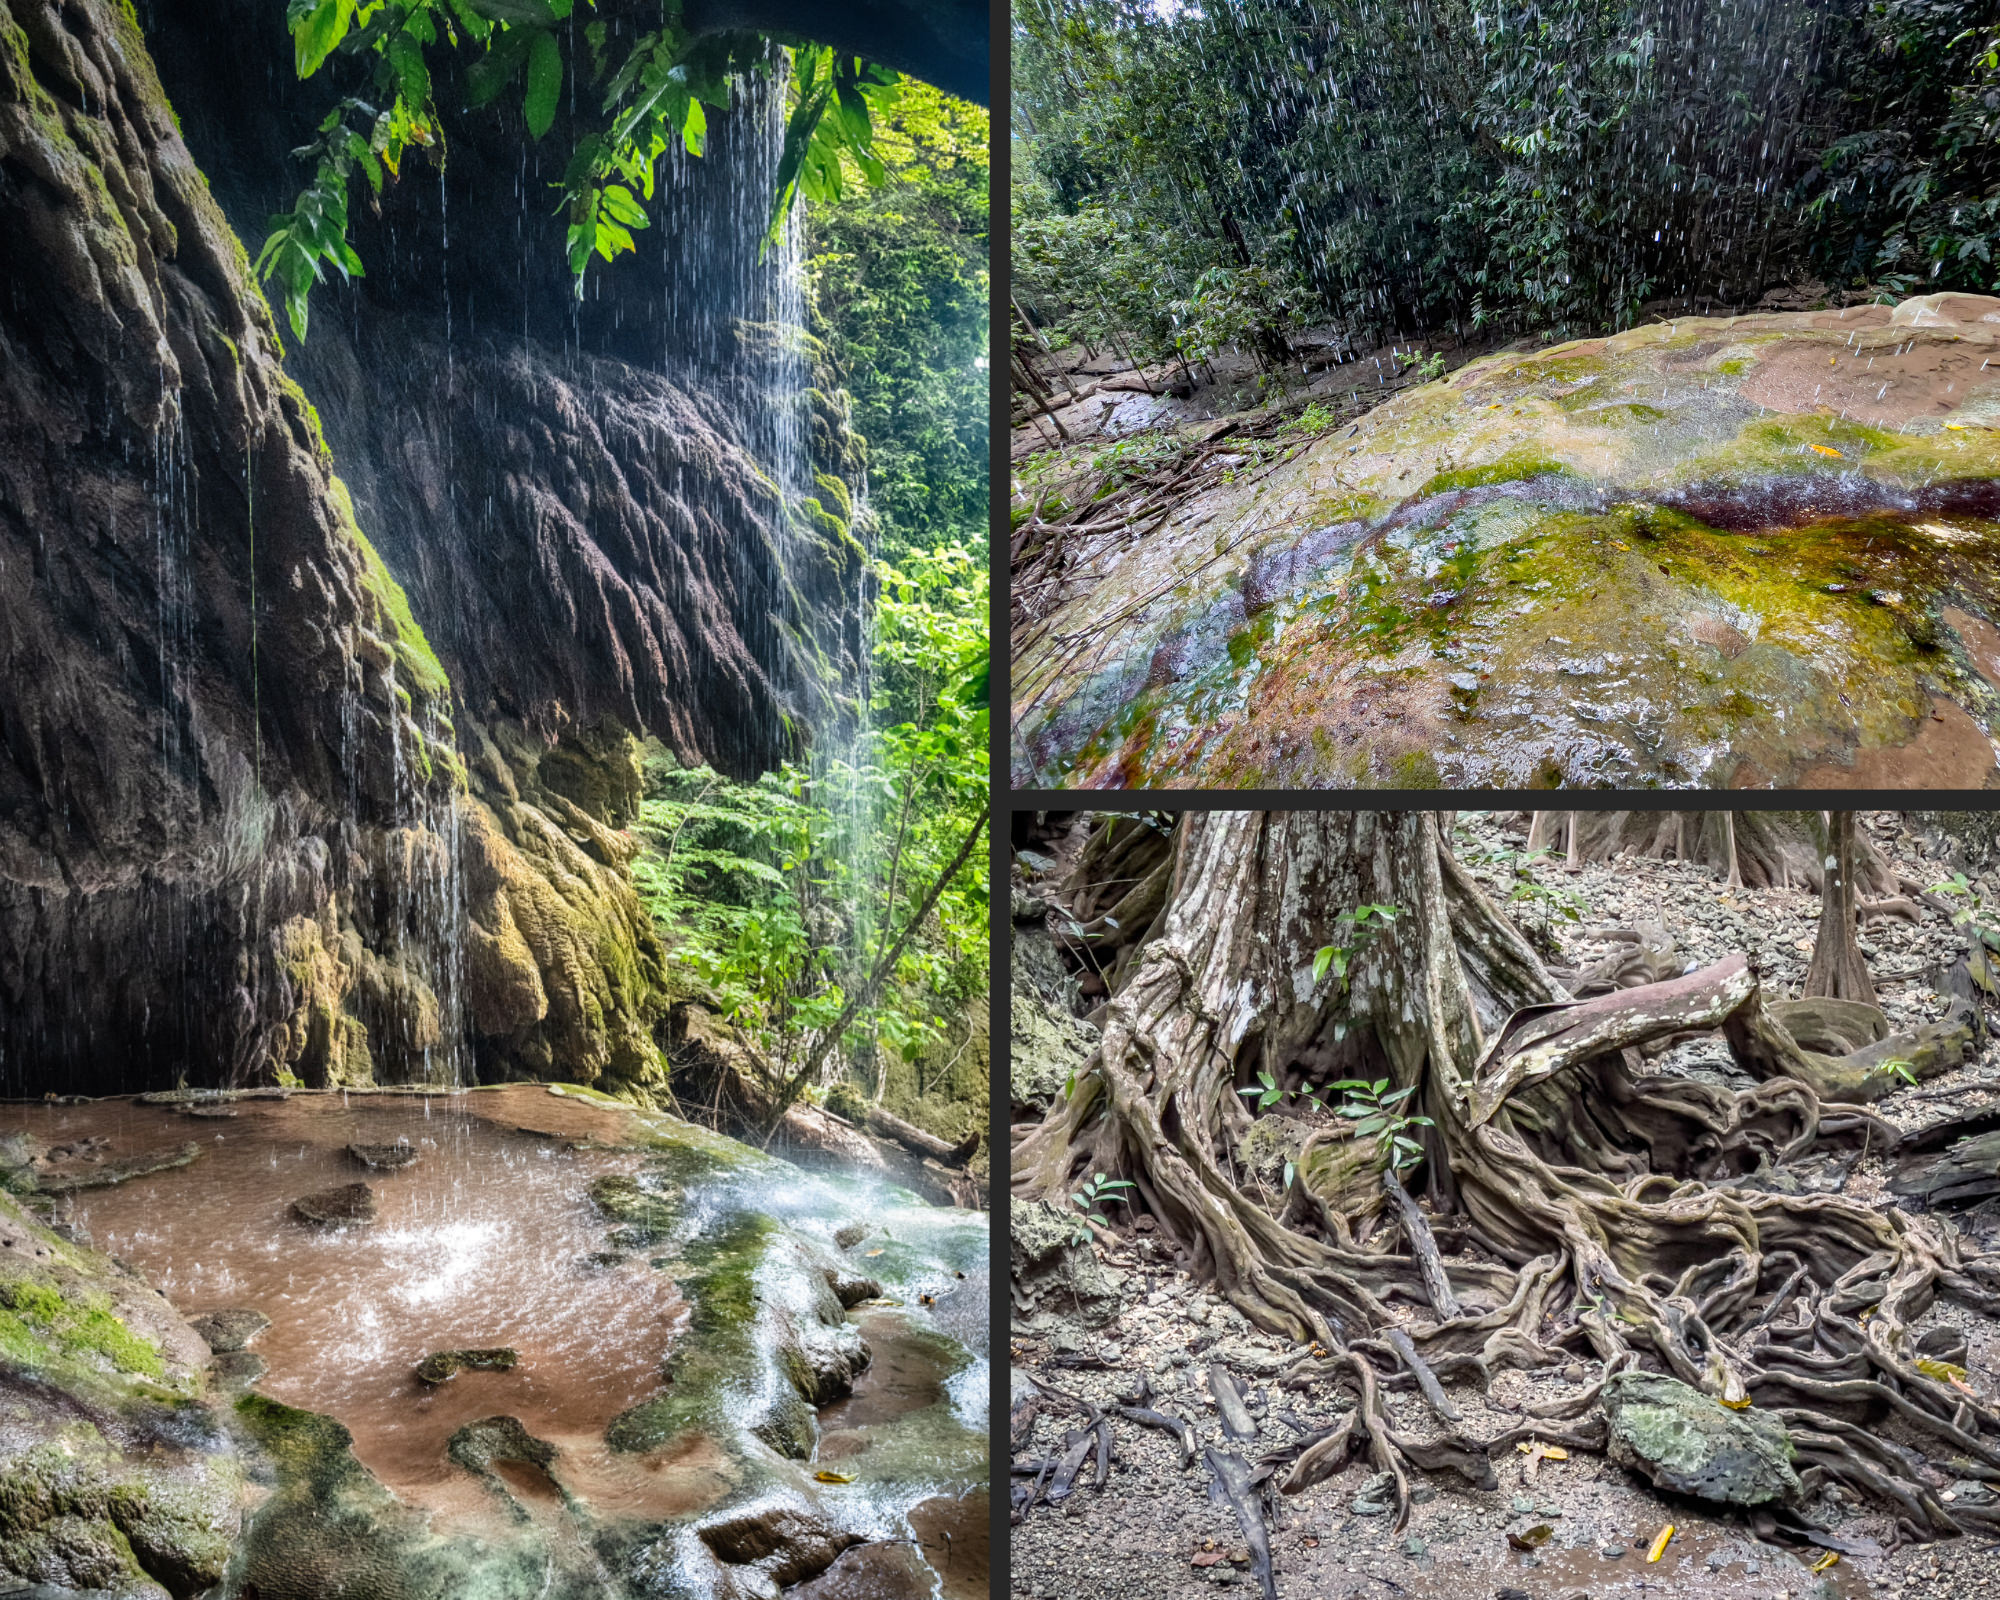 A photocollage of vistas taken at Hugh's Dale waterfall with the stunning Tahitian cheshnut trees and their complex curled above ground root system